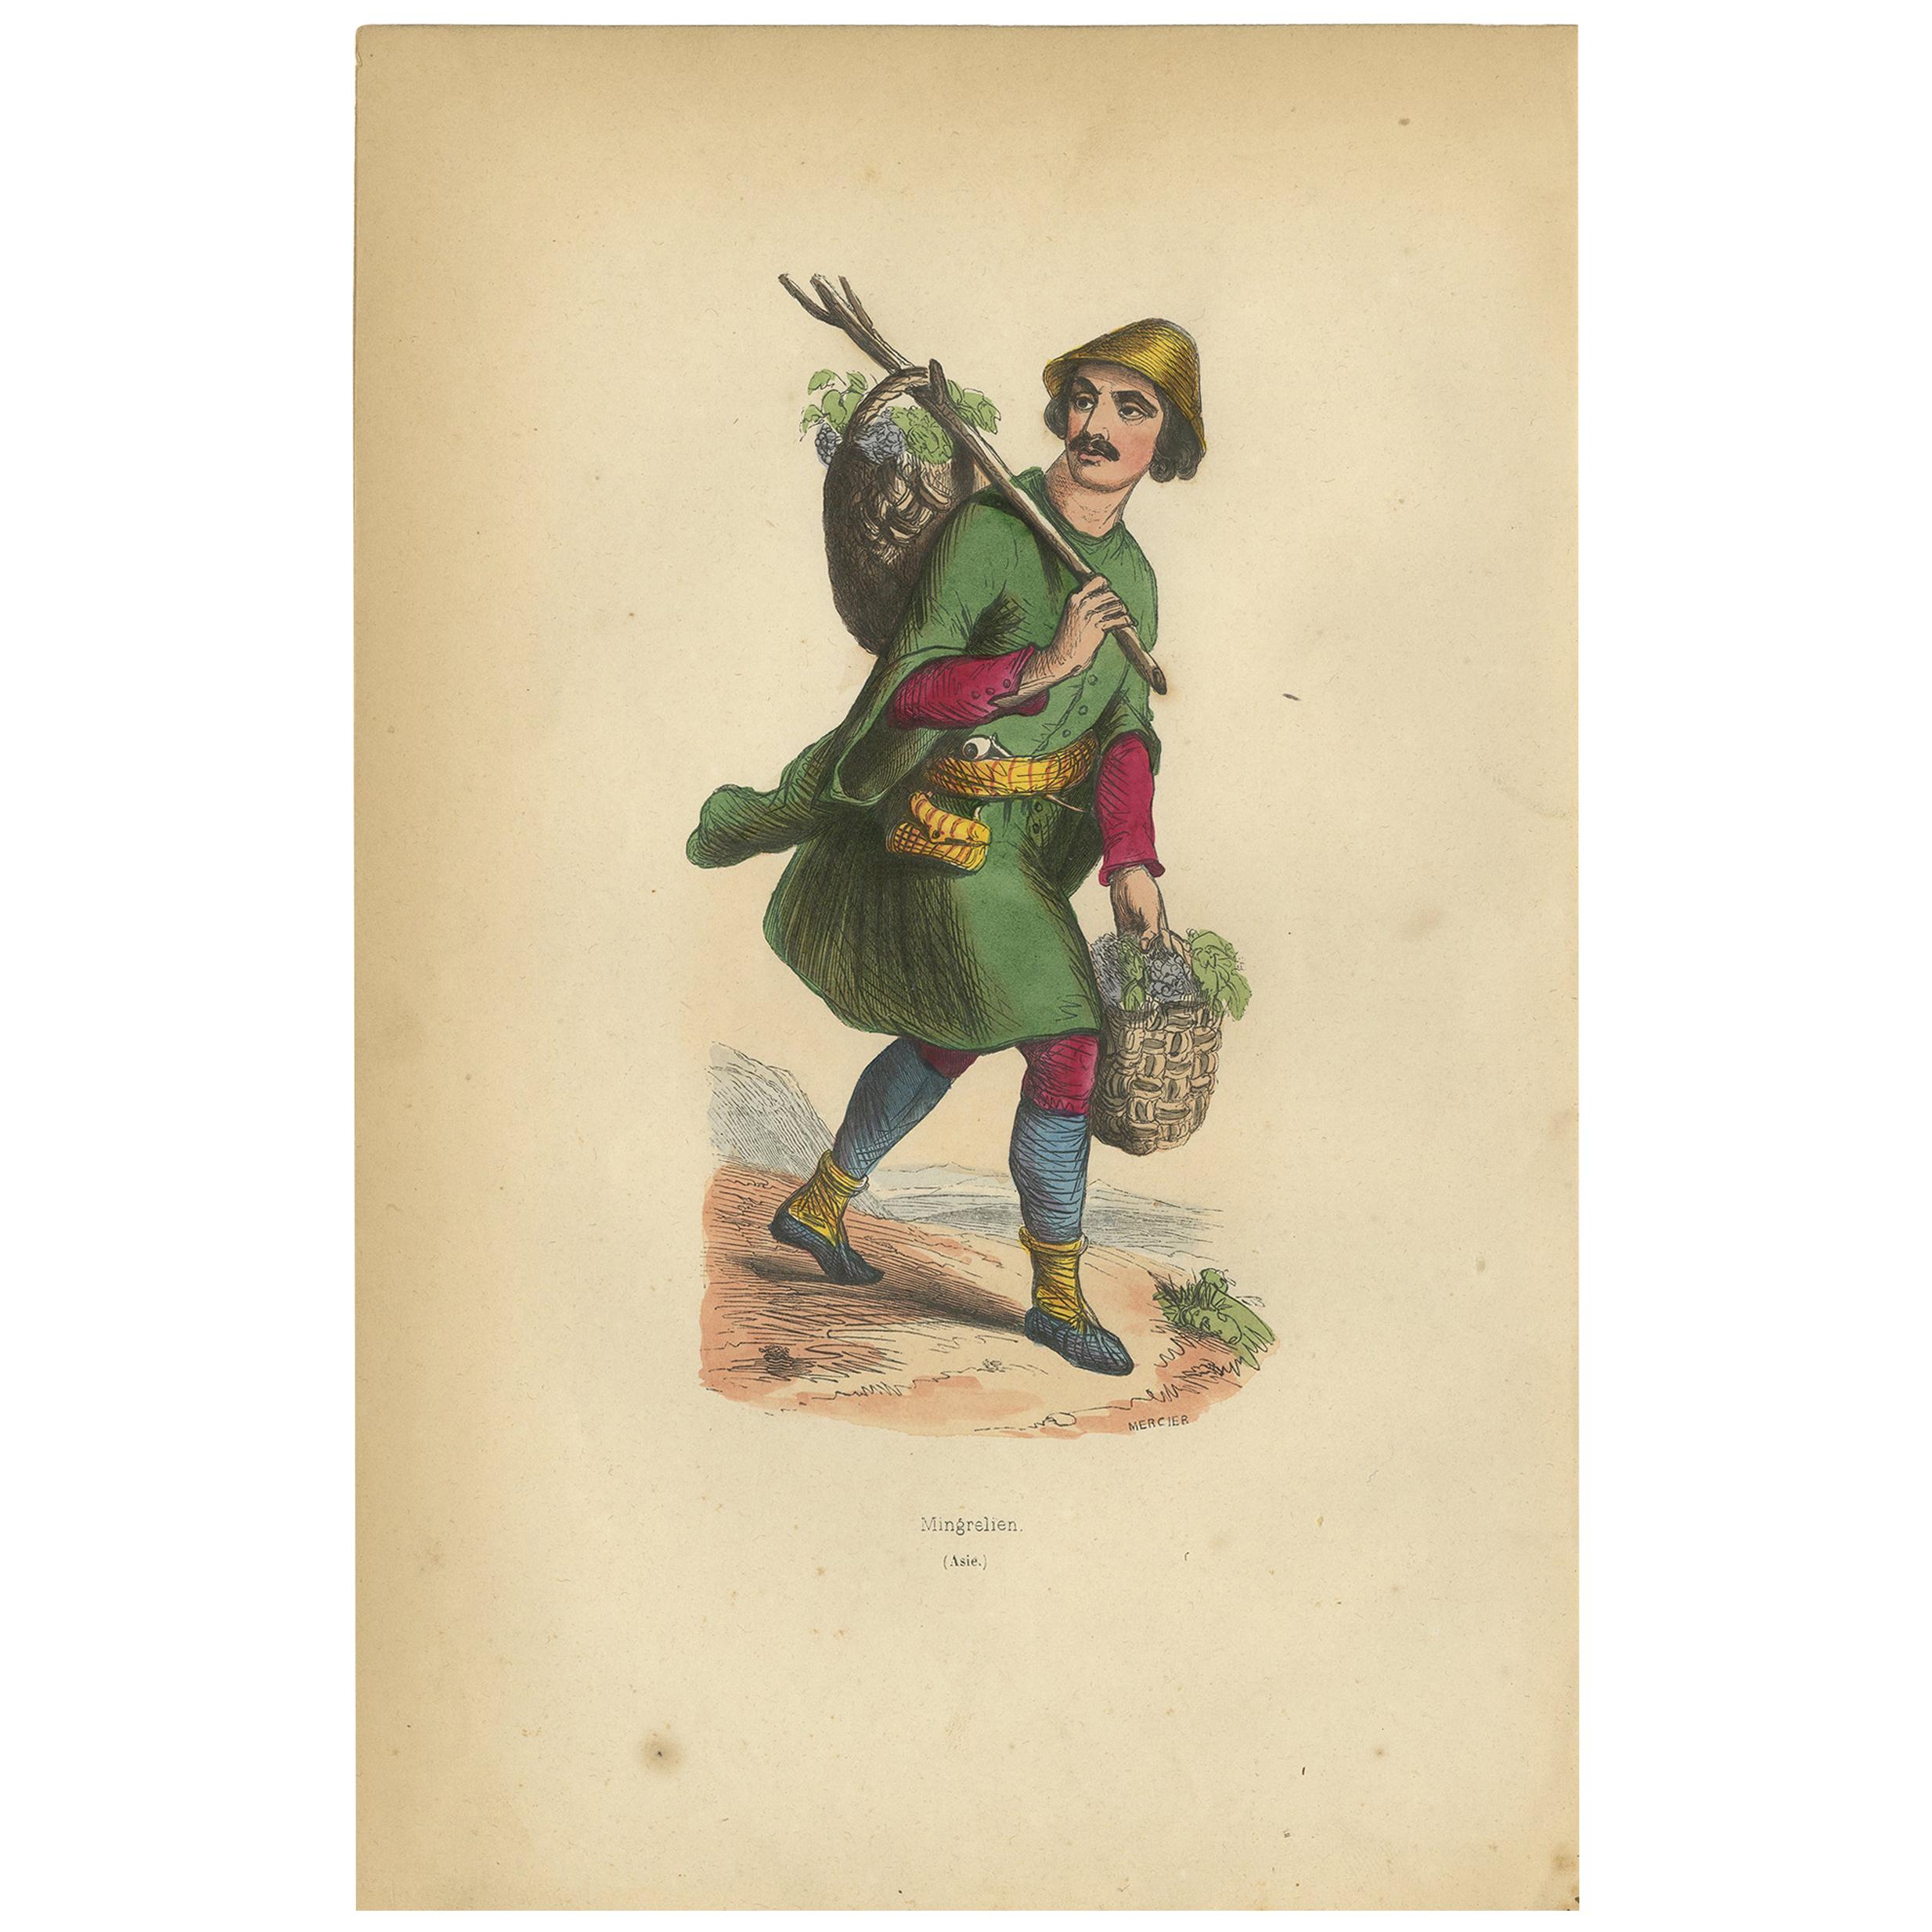 Antique Print of a Mingrelian Man by Wahlen, 1843